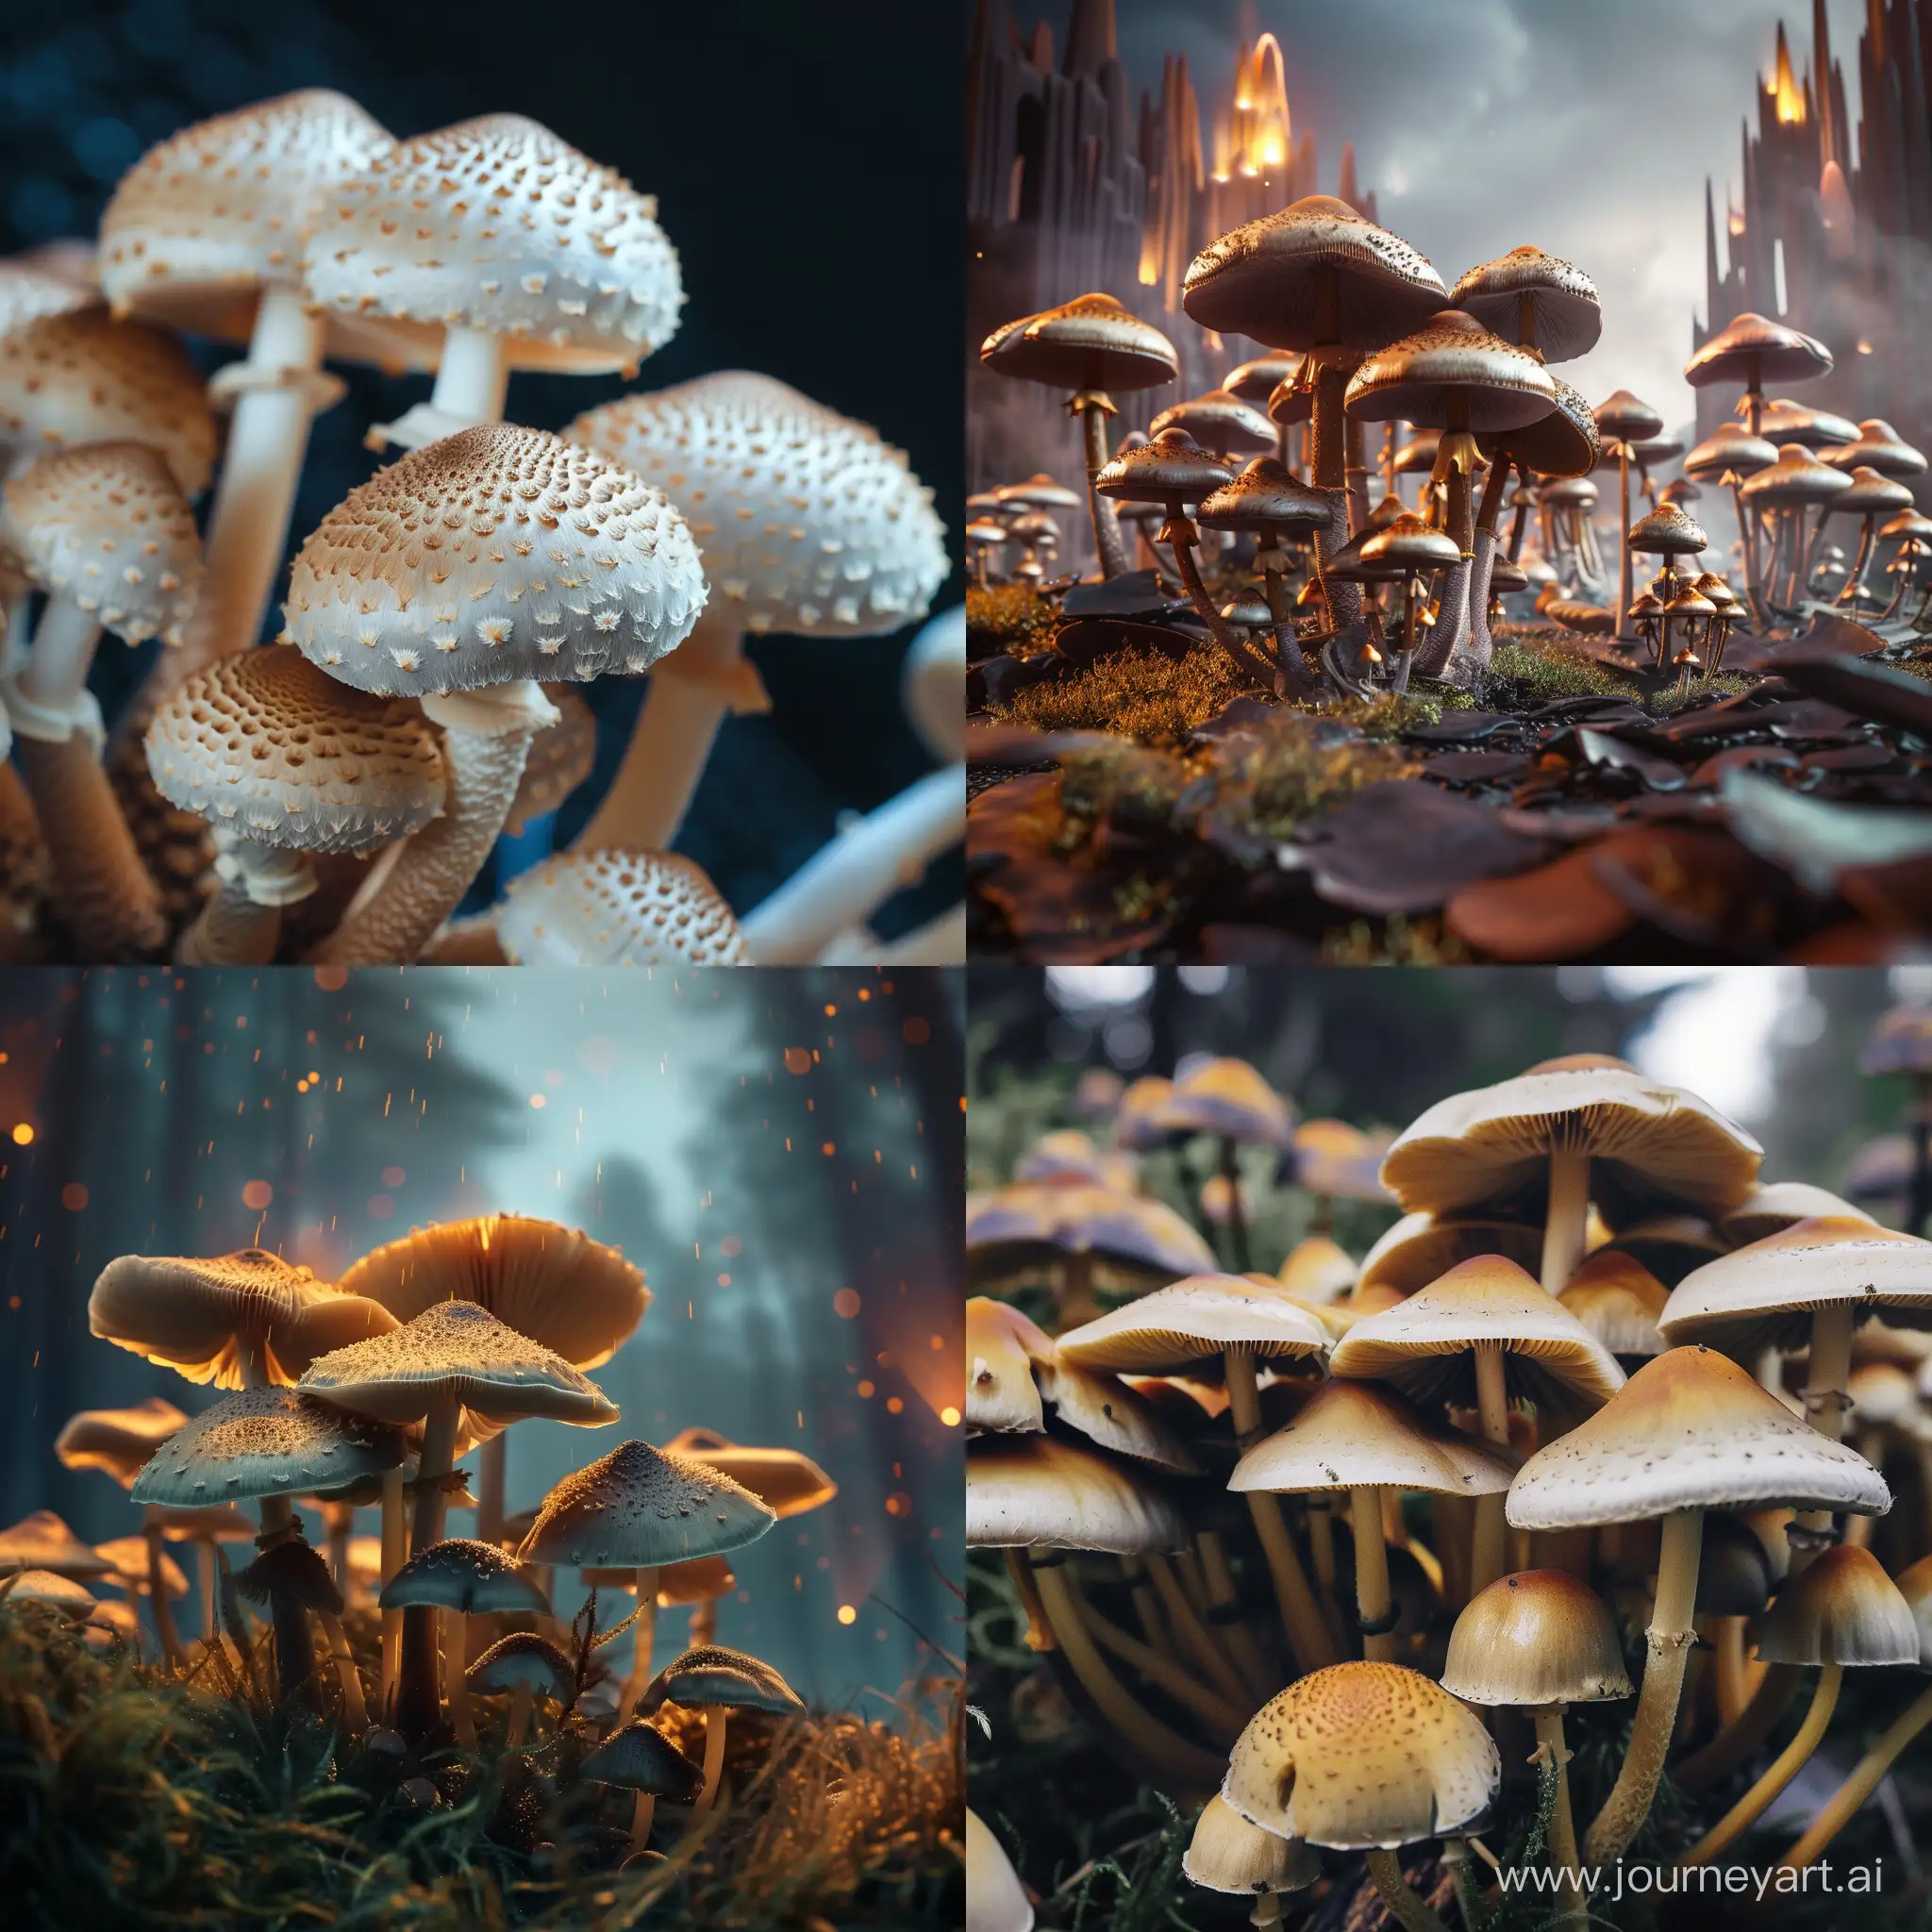 How would the human civilization evolve if we only ate mushrooms